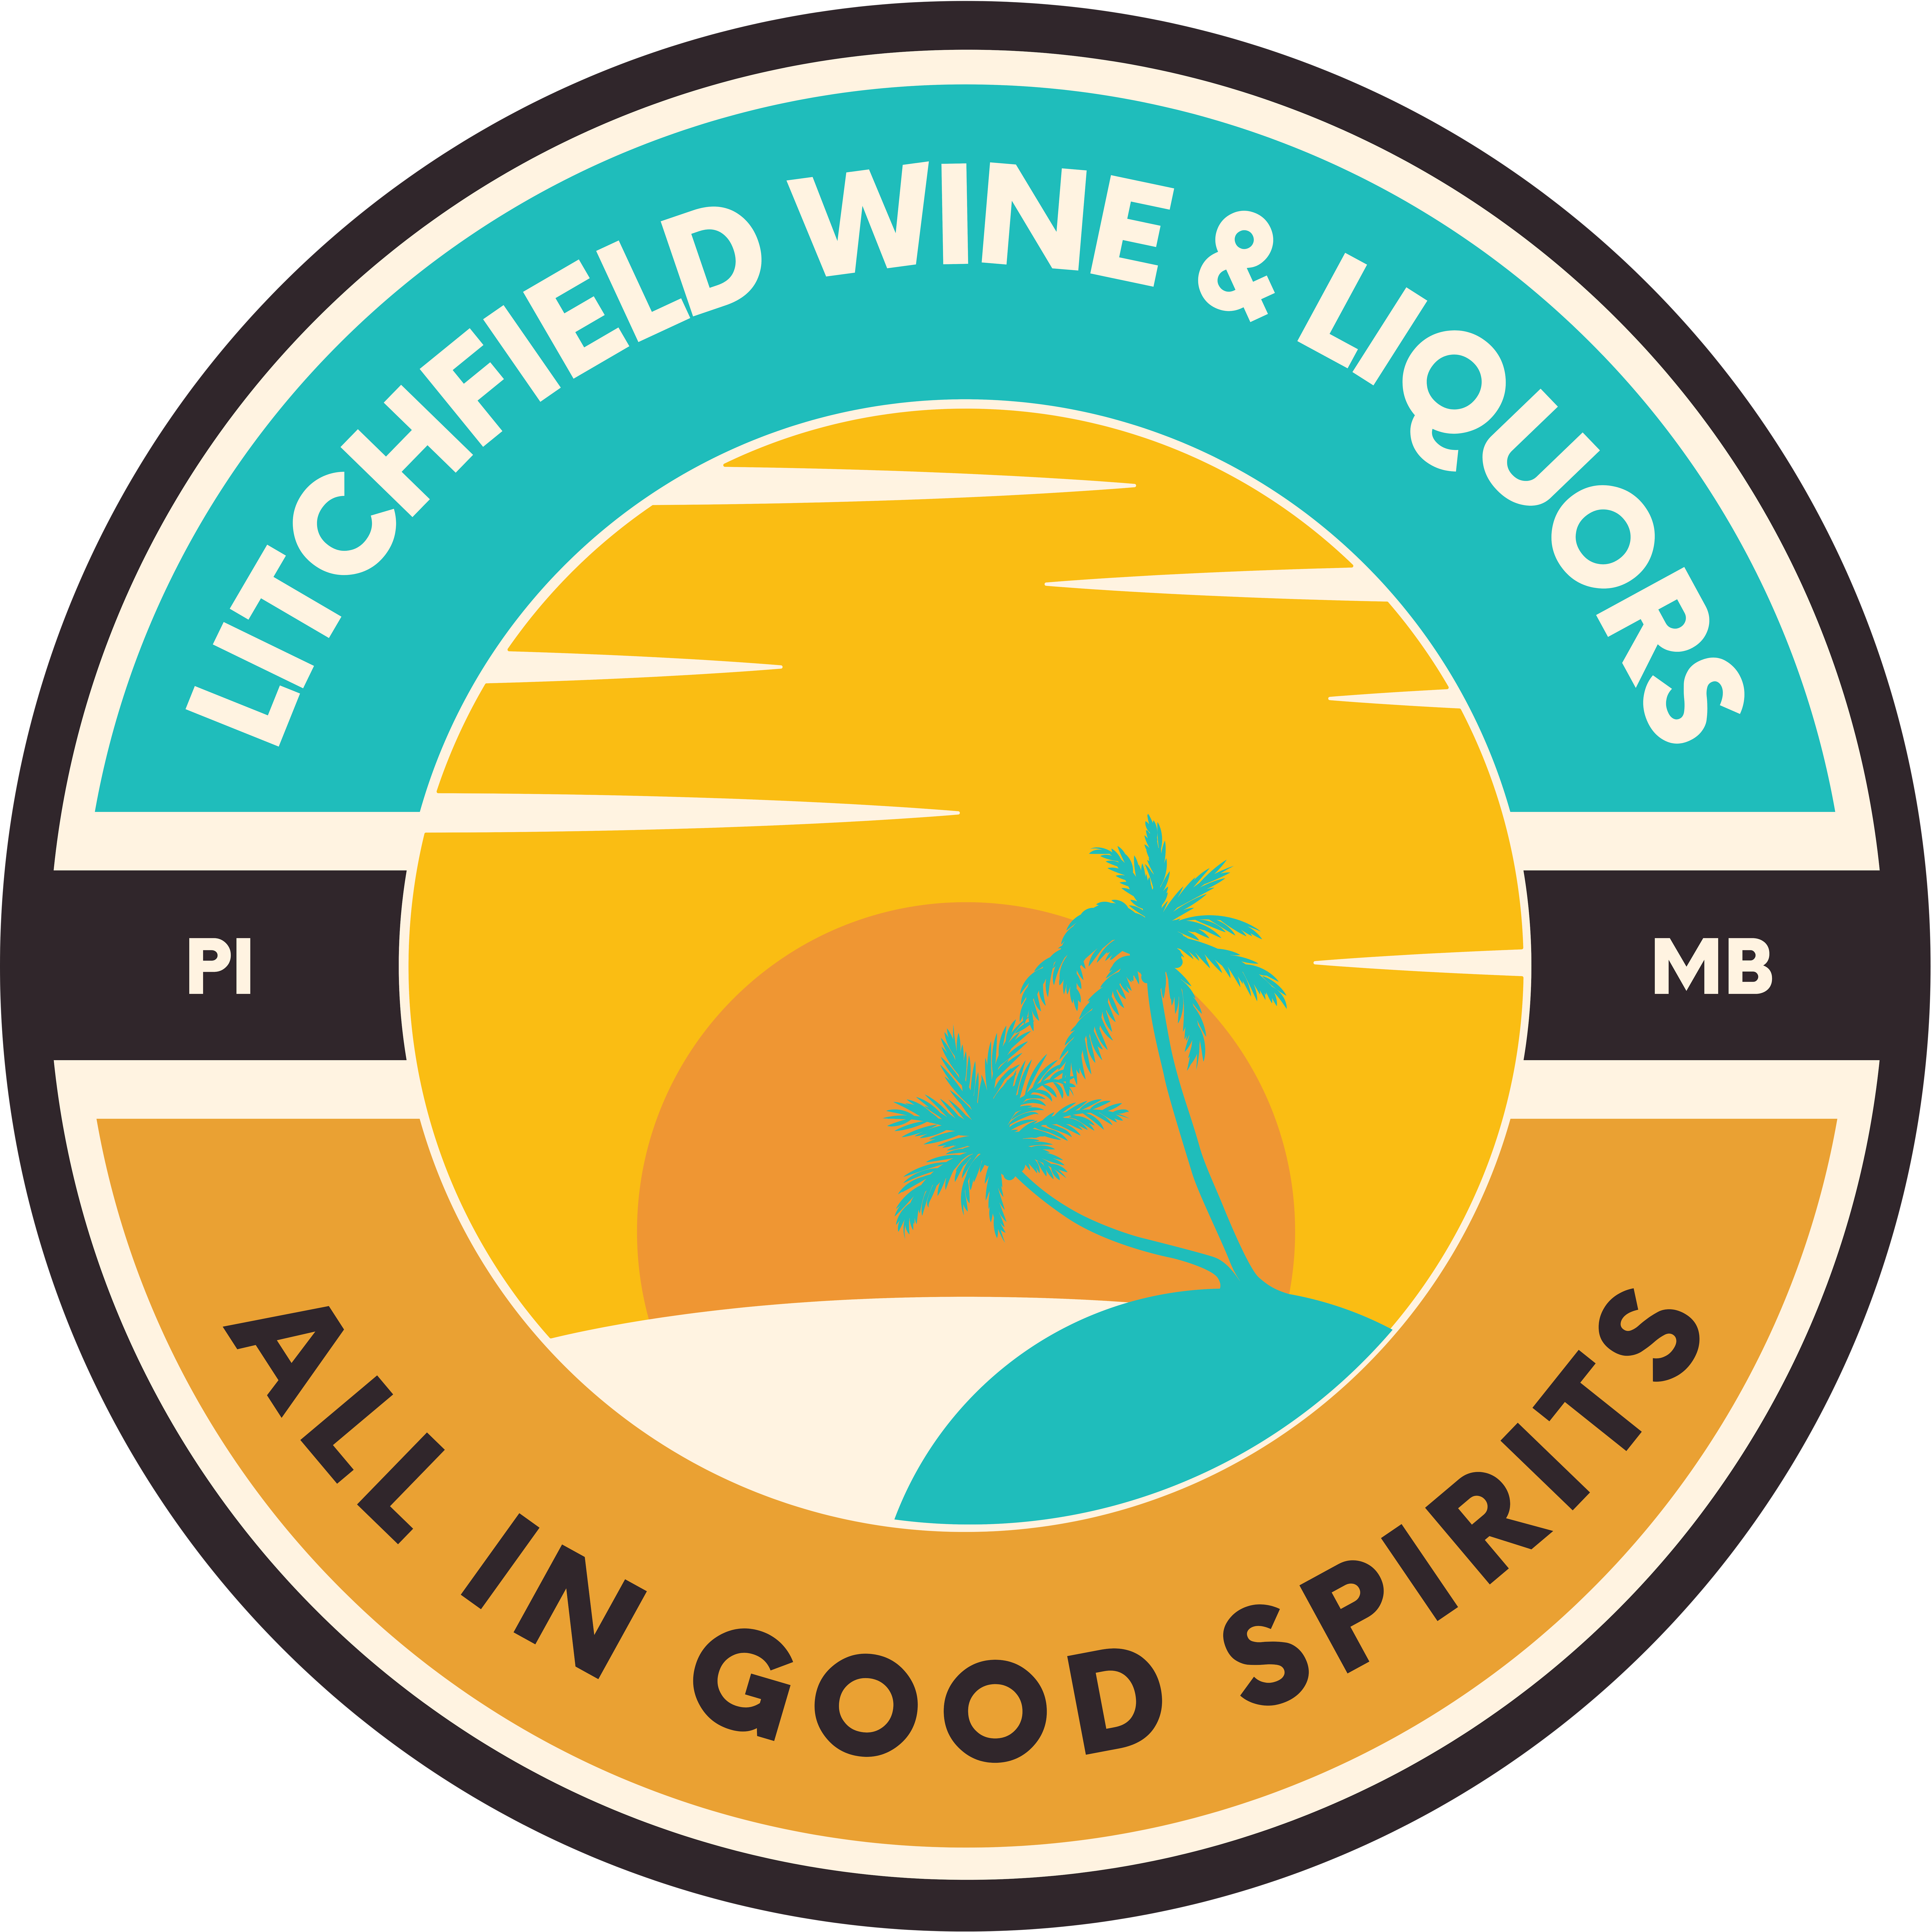 Litchfield Wine & Liquors and All in Good Spirits